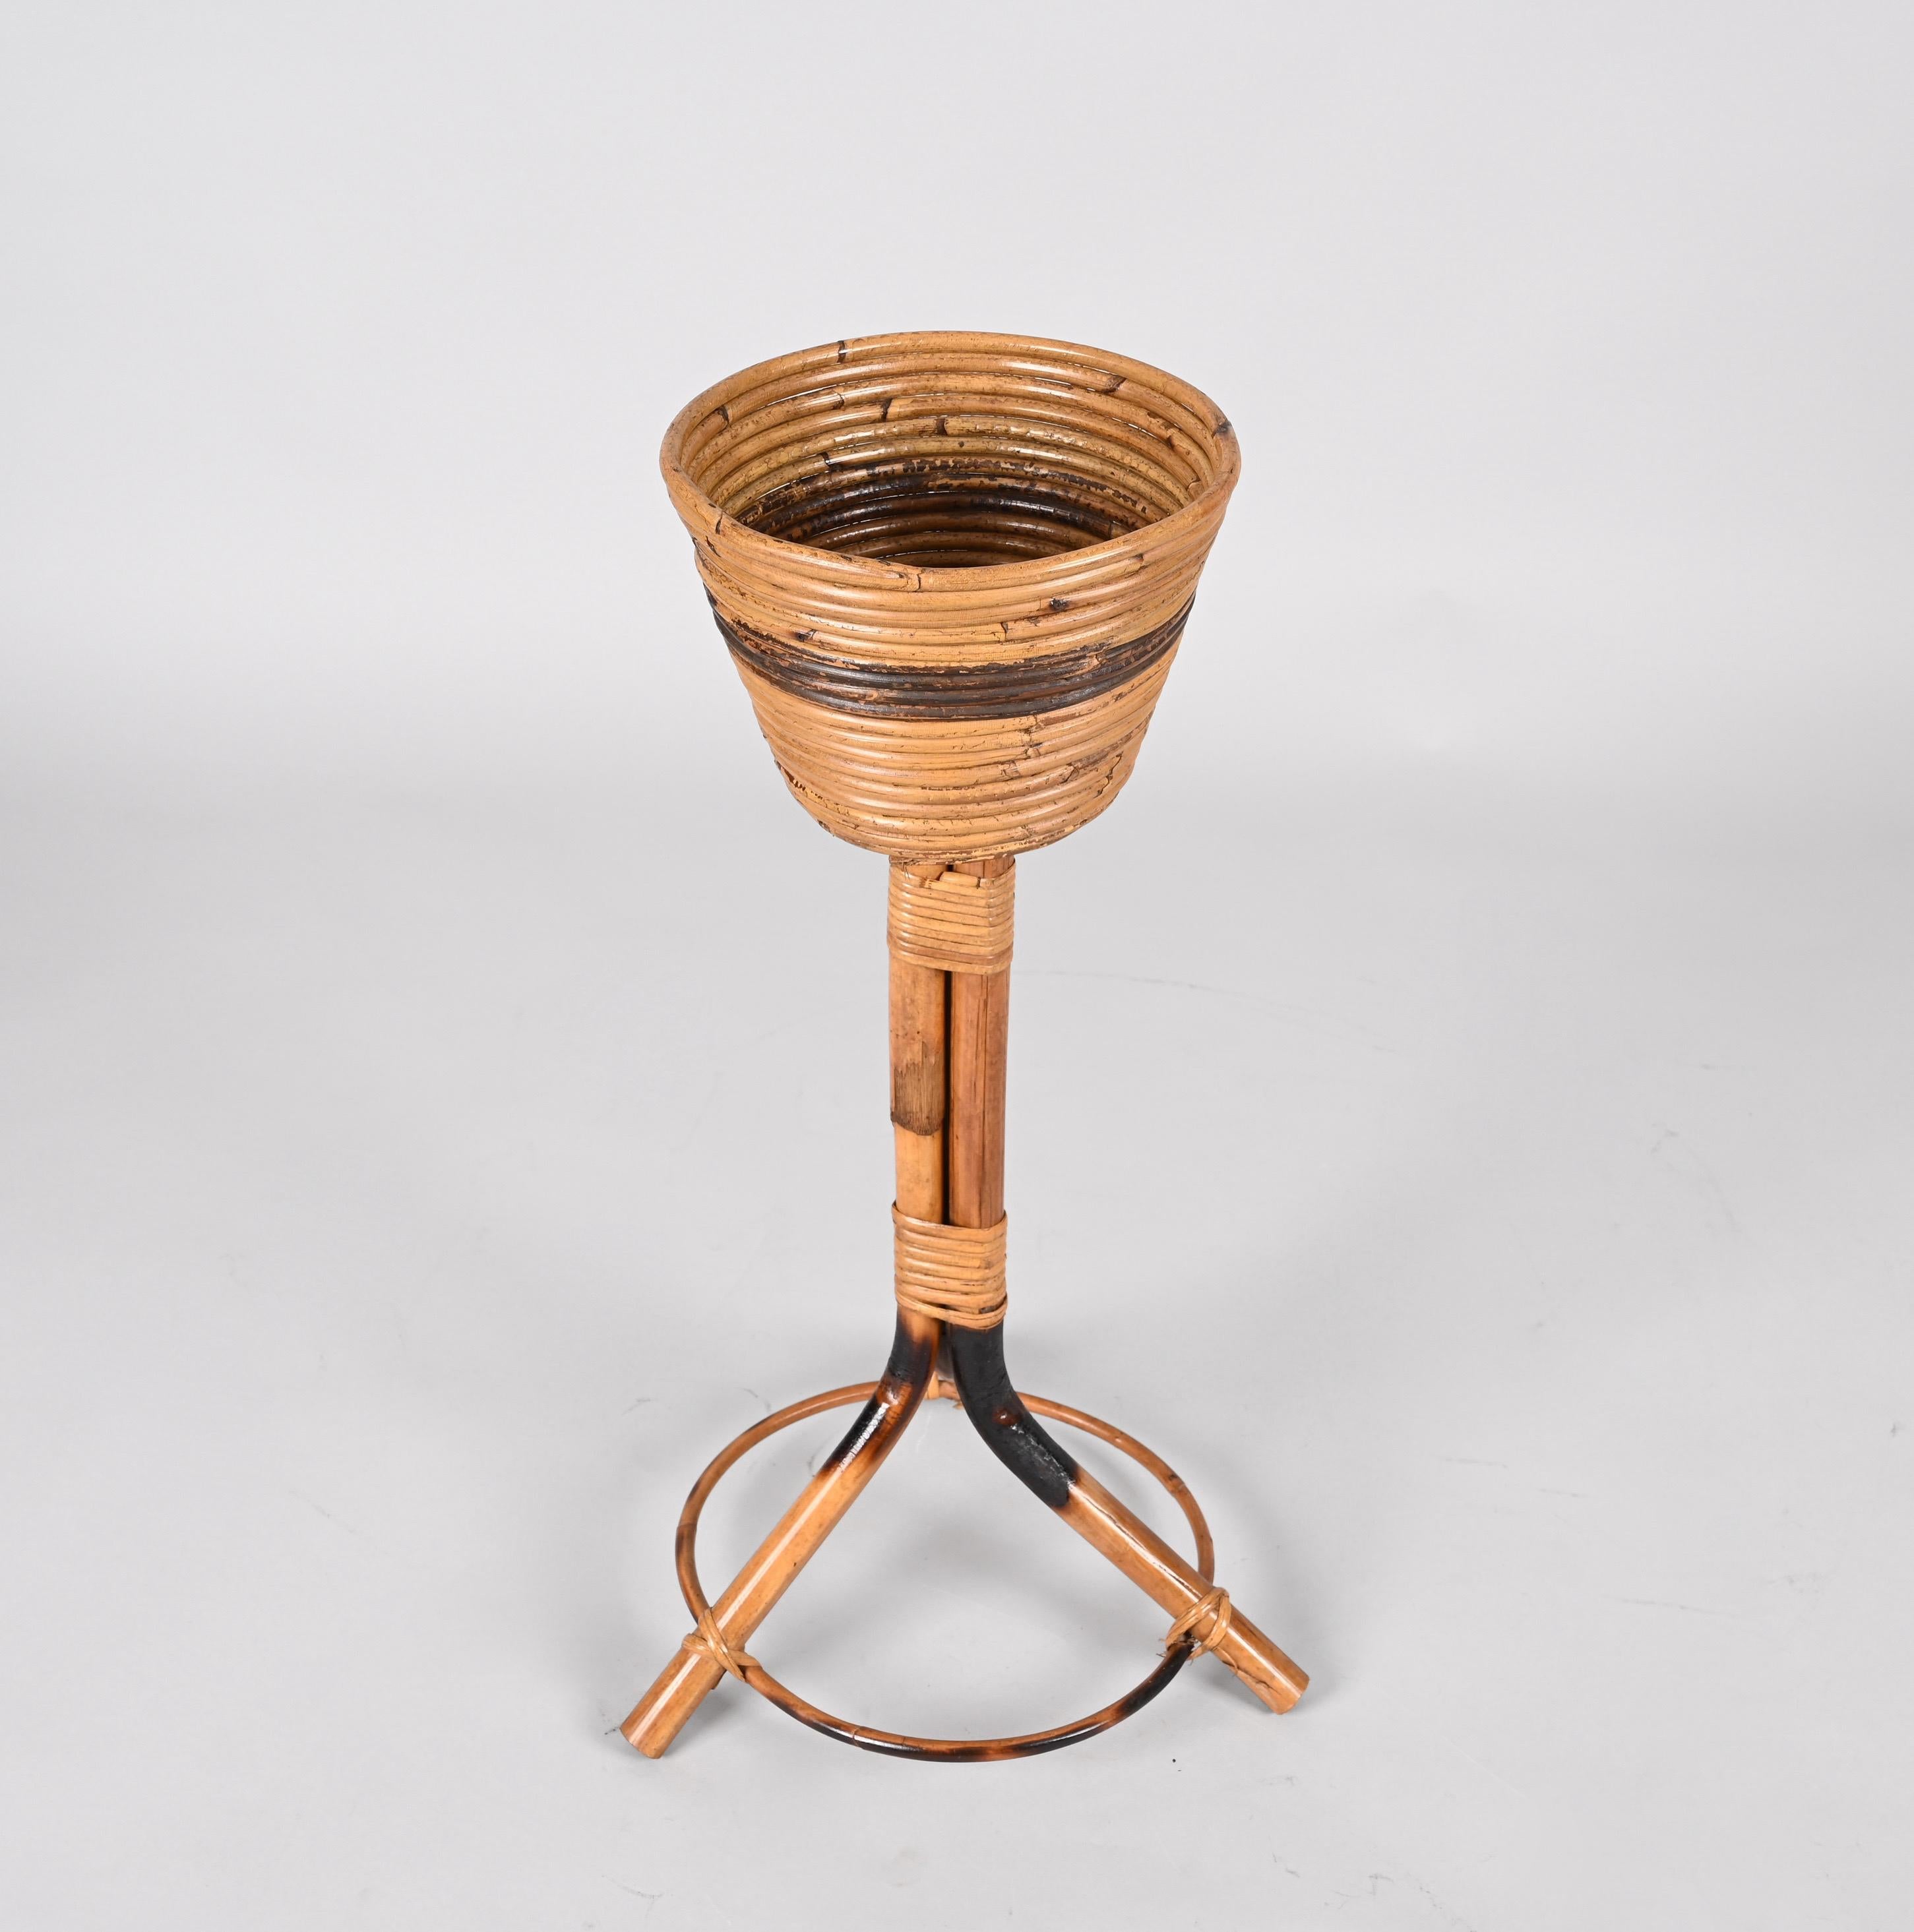 Midcentury Italian Bamboo Cane and Rattan Round Plant Holder, 1950s For Sale 9